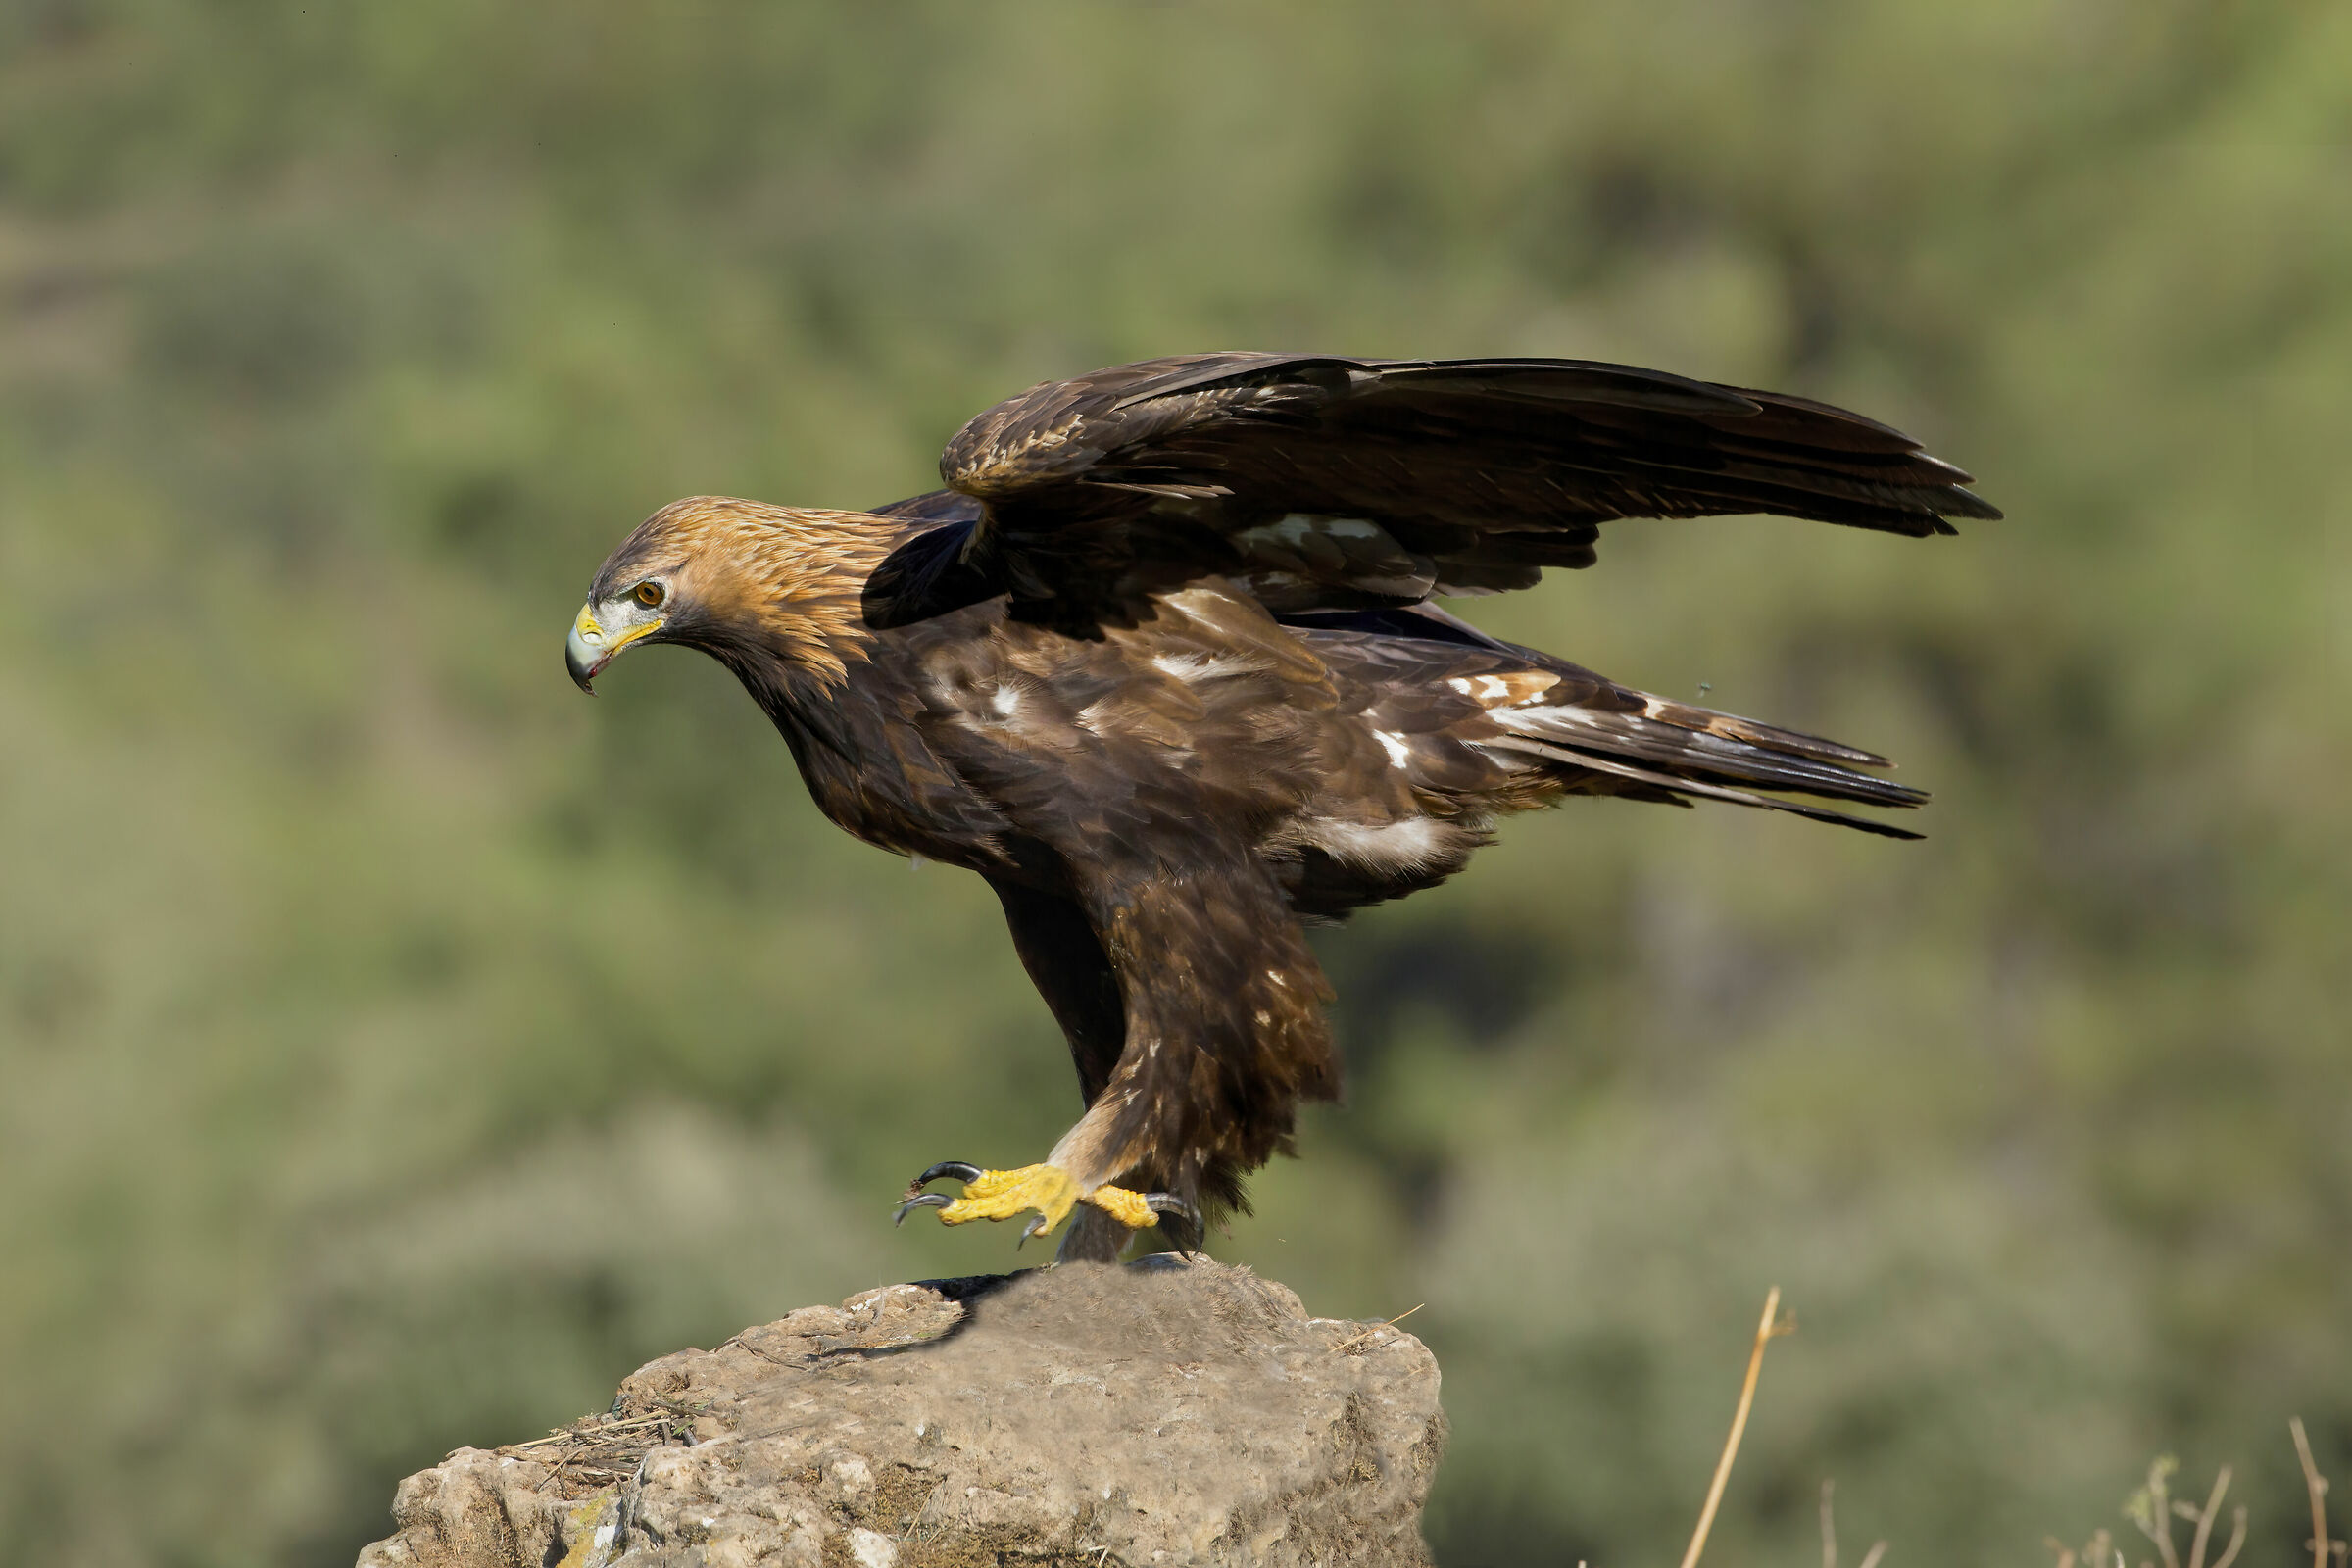 Uncertain golden eagle on roost...